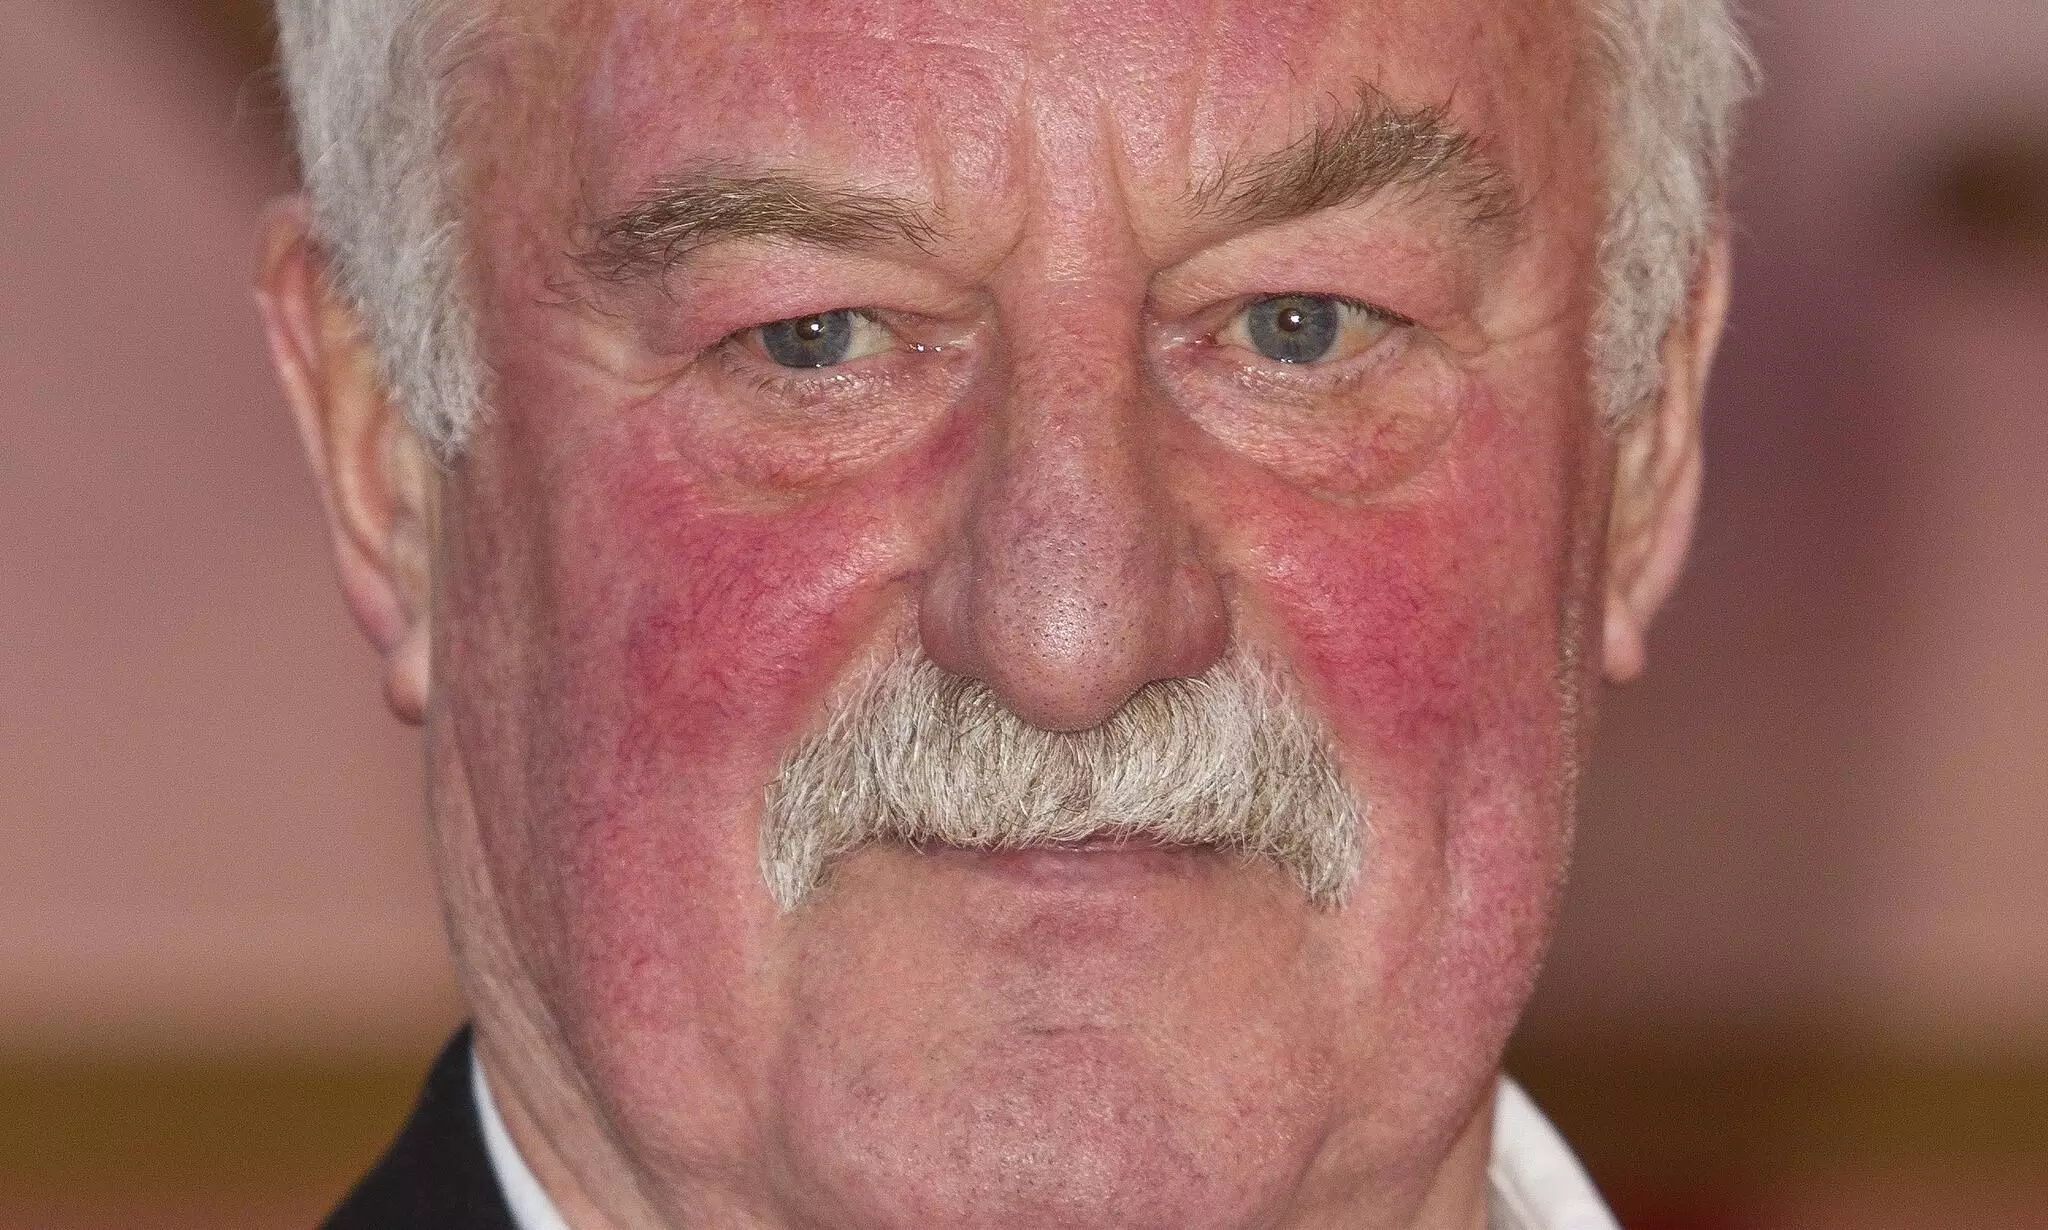 Actor Bernard Hill of Titanic and Lord of the Rings has died at 79